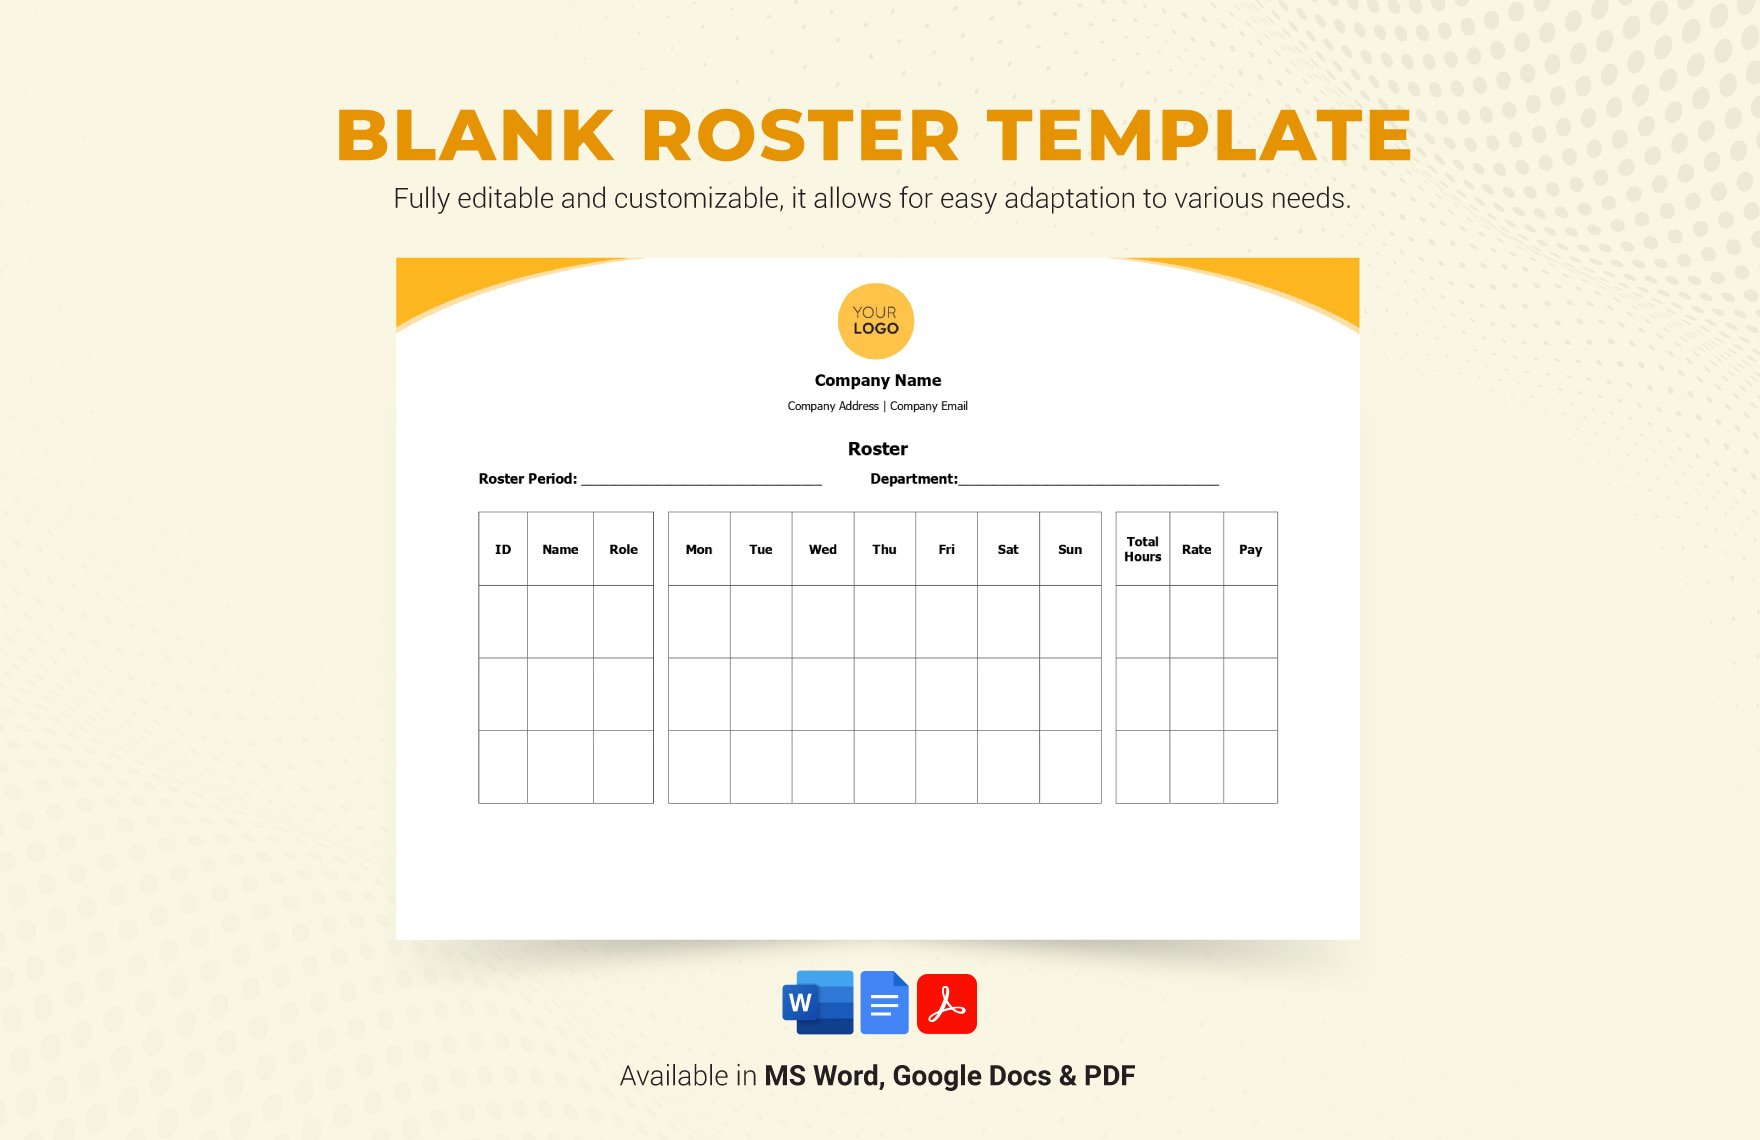 Blank Roster Template